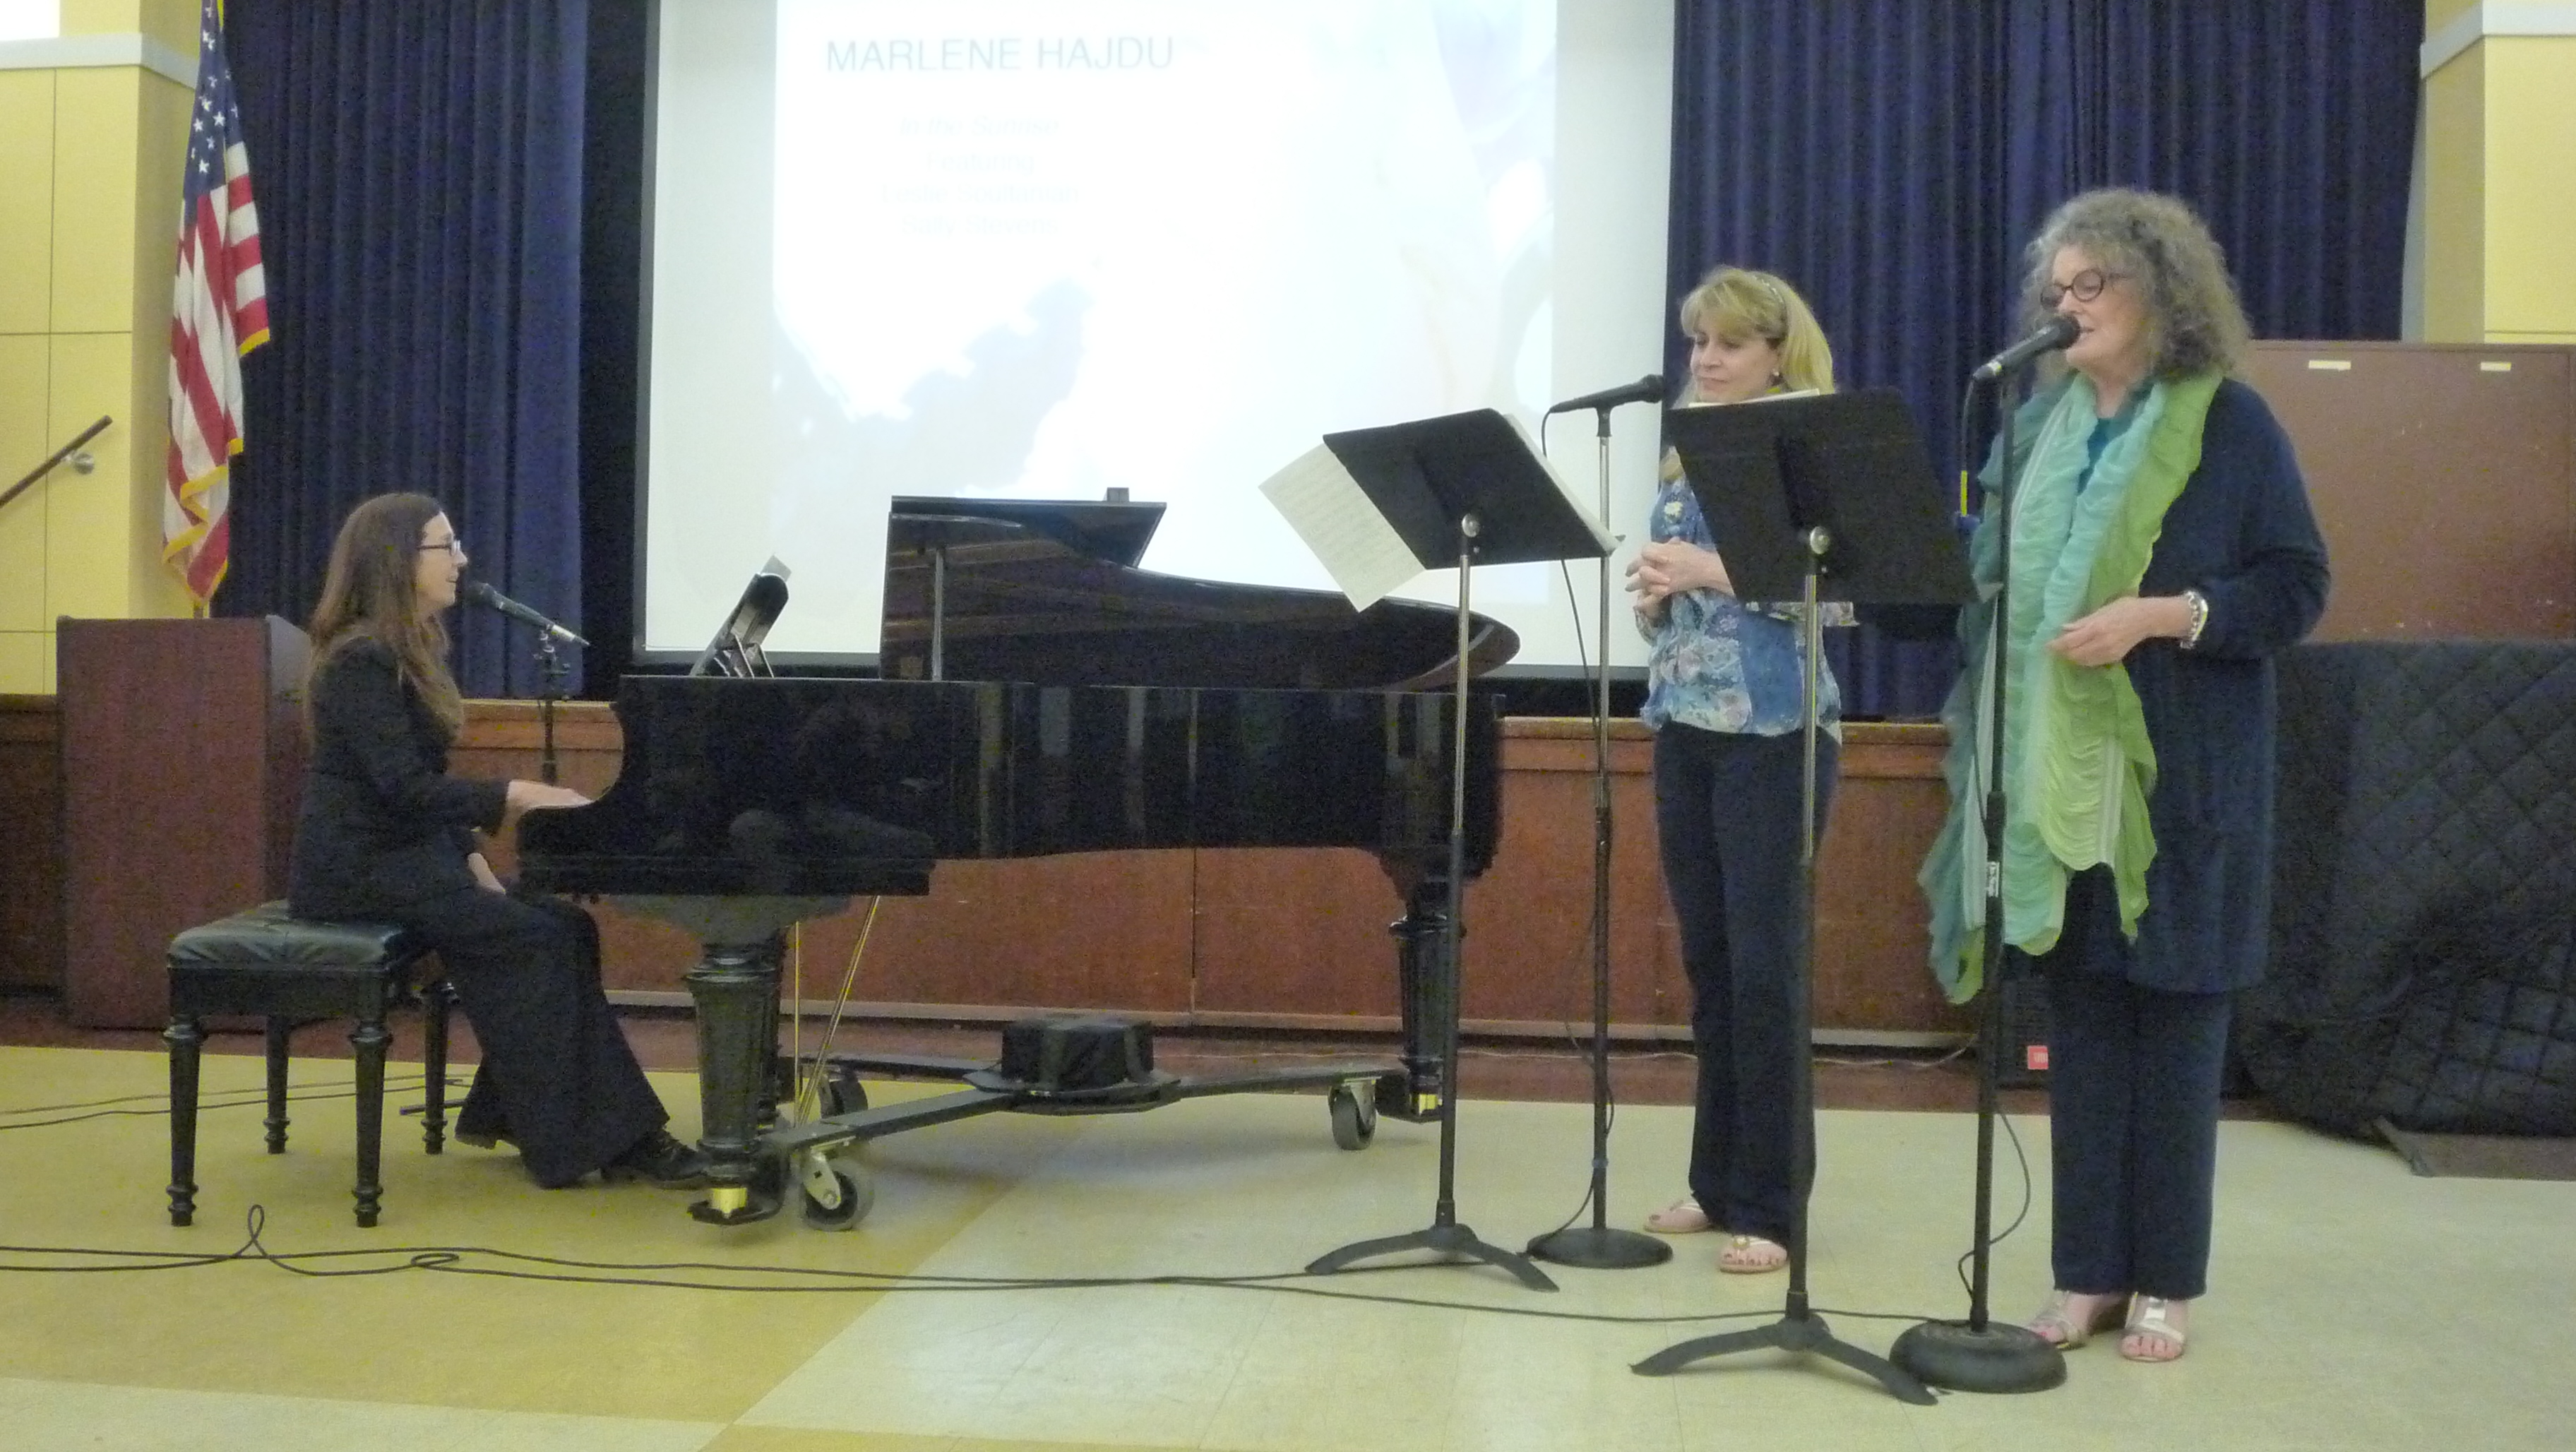 Marlene Hajdu performs a new piece with vocalists Leslie Soultanian and Sally Stevens.